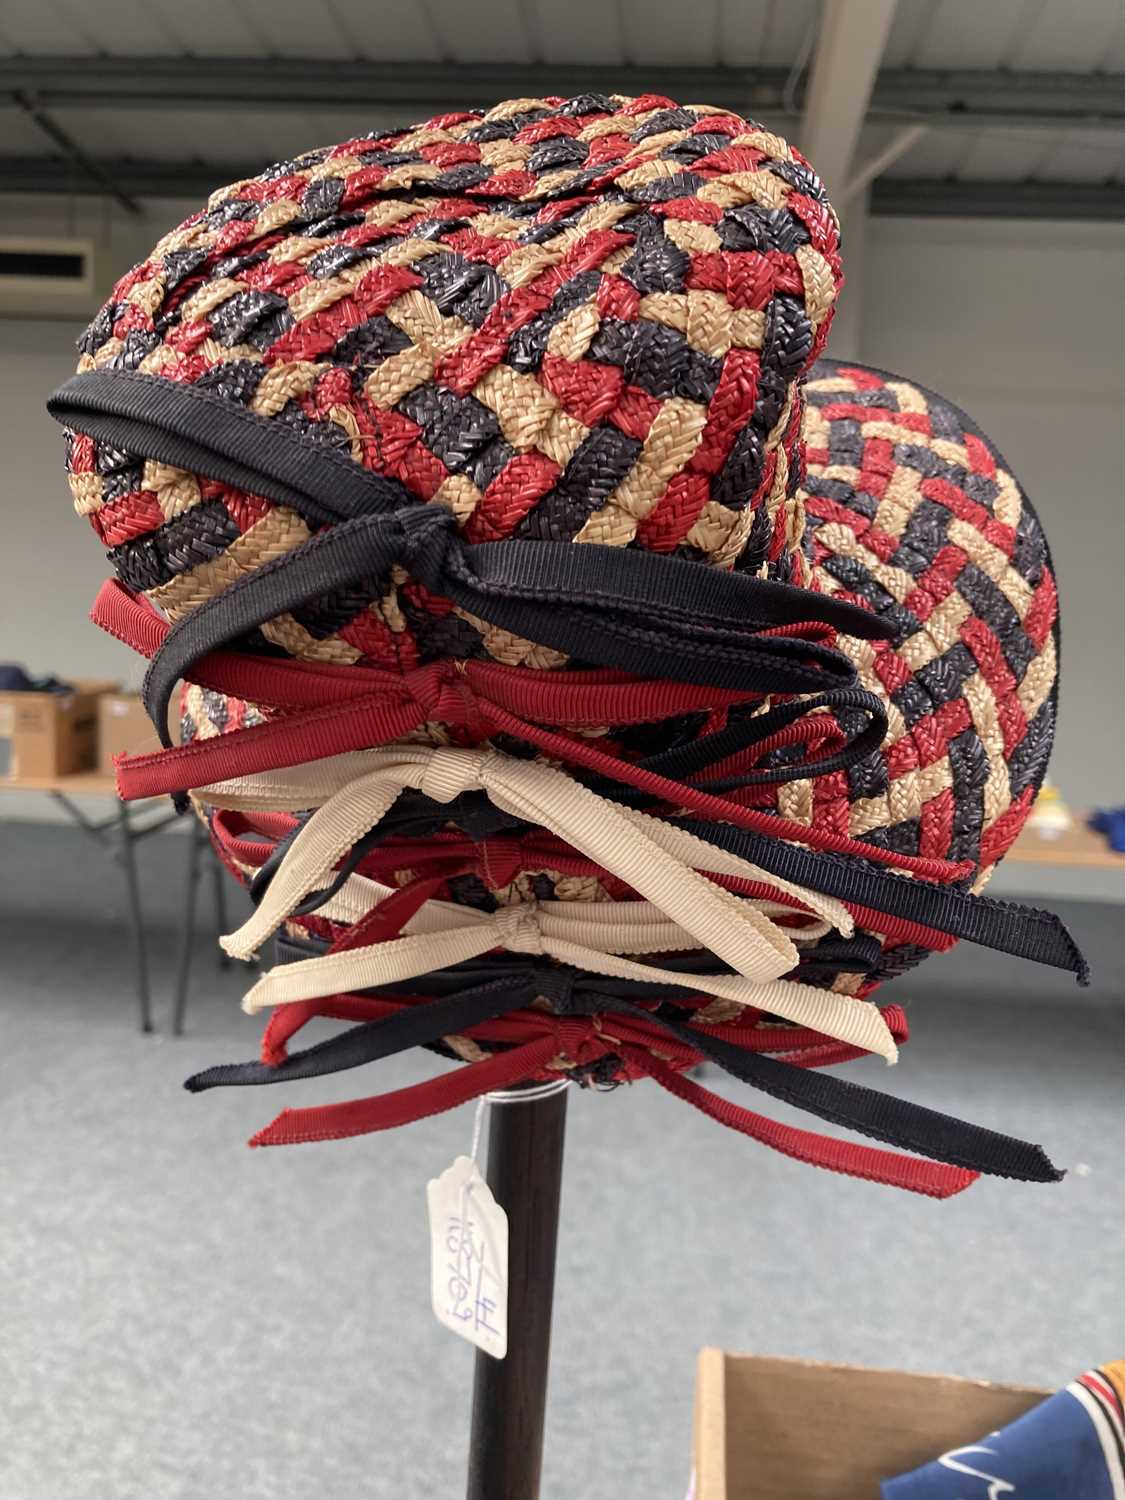 Circa 1940s Amercian Red, White and Blue Woven Raffia Tilt Hat, with alternating coloured - Image 4 of 4